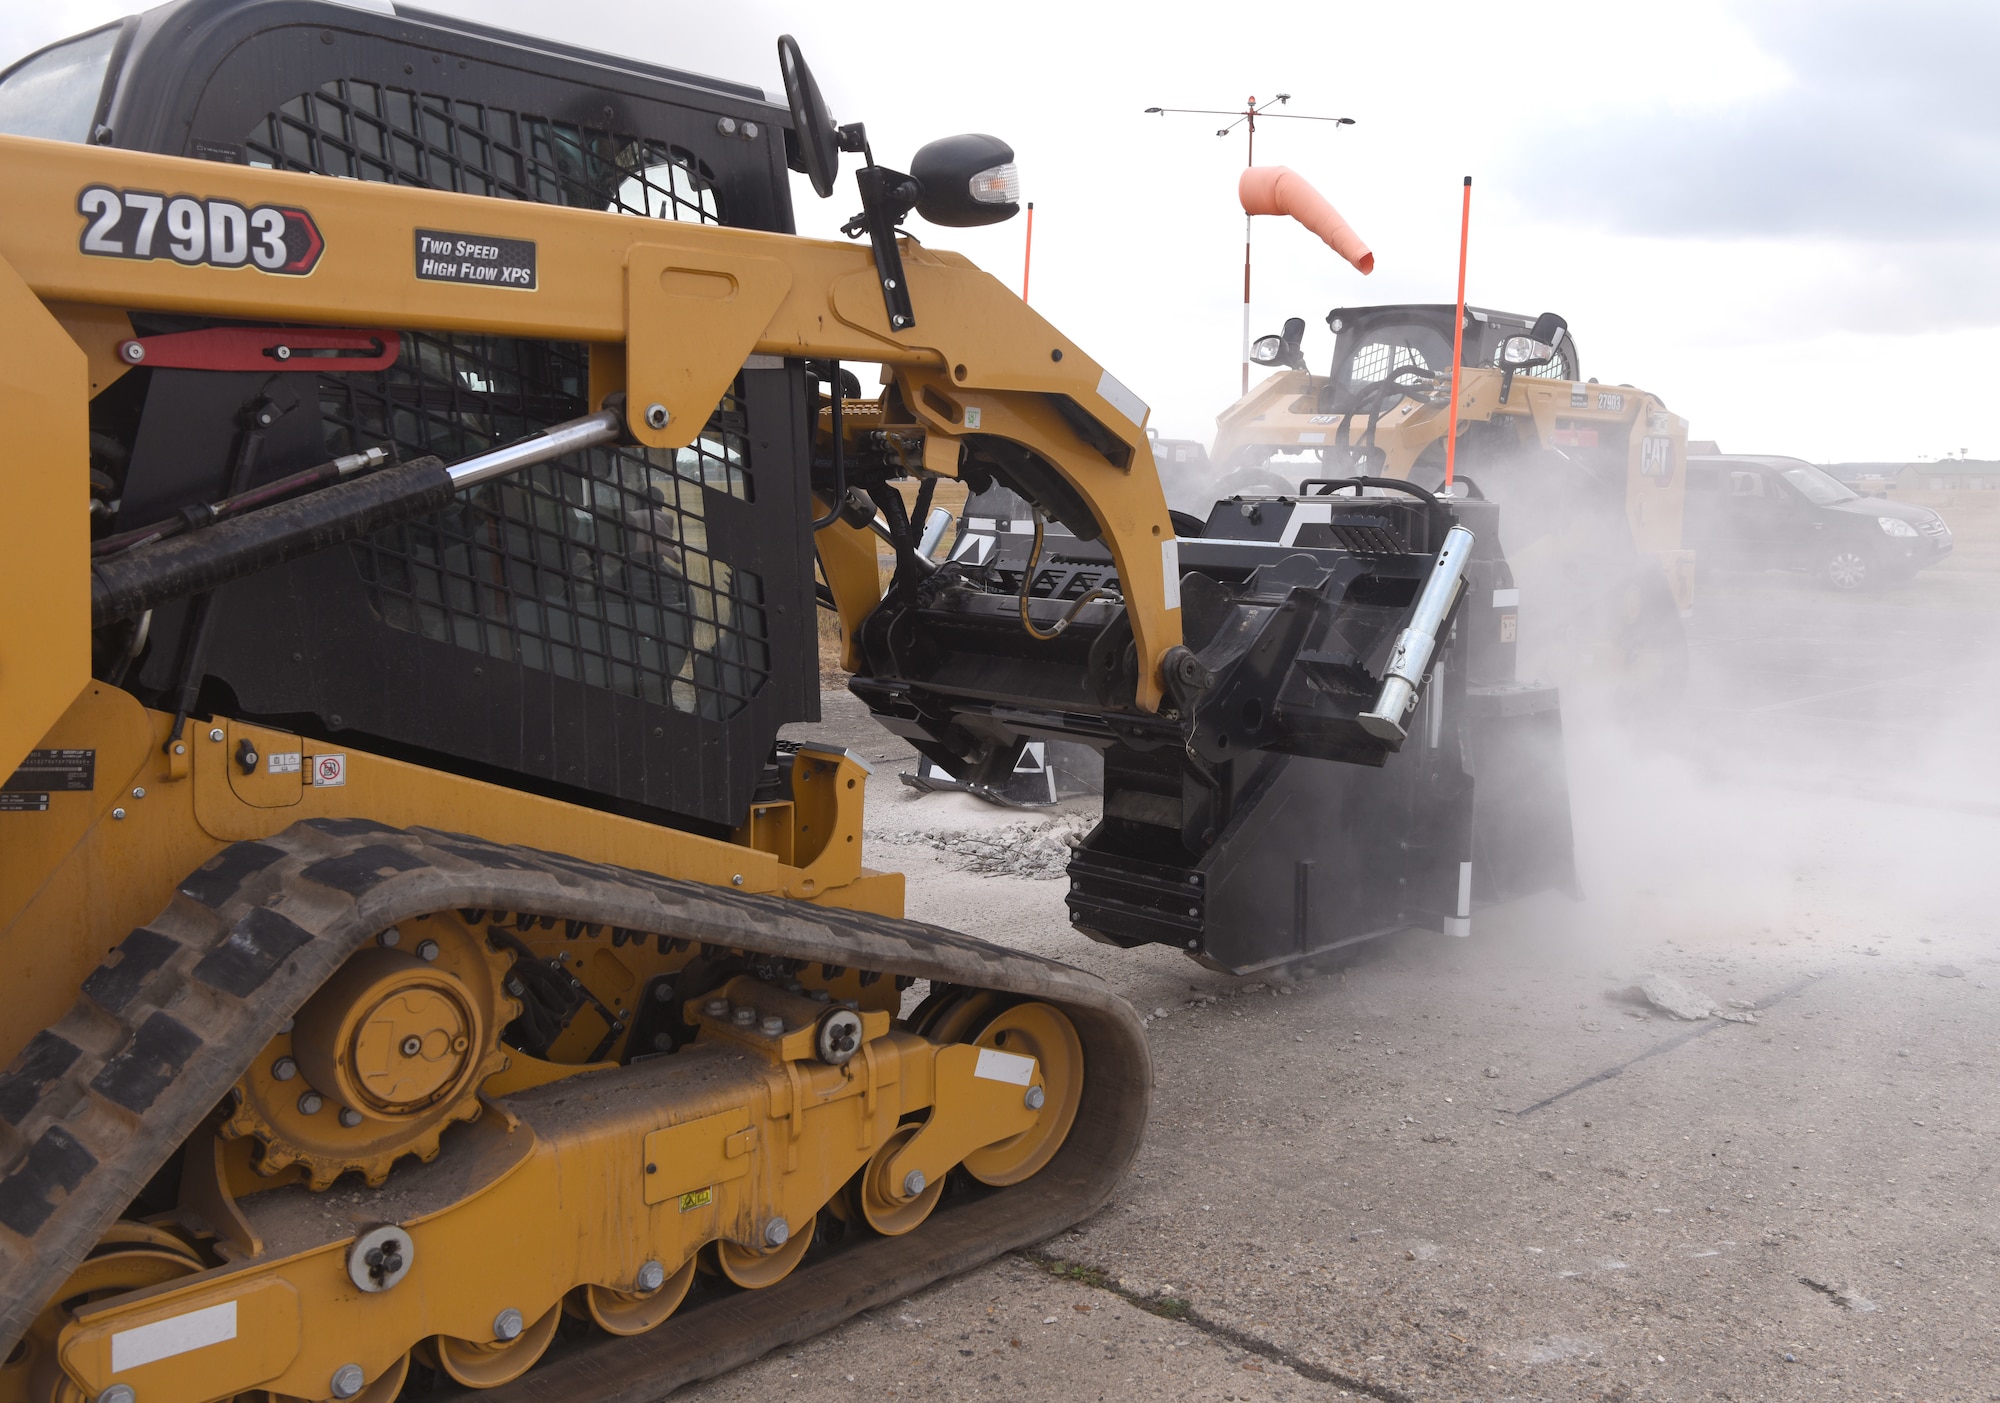 Two compact track loaders are used by Airmen from the 100th Civil Engineer Squadron to cut concrete during a chemical, biological, radiological, nuclear and explosives exercise at Royal Air Force Mildenhall, England, Aug. 17, 2022. The Airmen used a variety of equipment including excavators and loaders to practice removing damaged concrete and base course on a simulated runway. They practiced repair, break up and removal of concrete, before mixing and pouring new, quick-drying concrete and levelling it, all while wearing mission-oriented protective postures gear. (U.S. Air Force photo by Karen Abeyasekere)